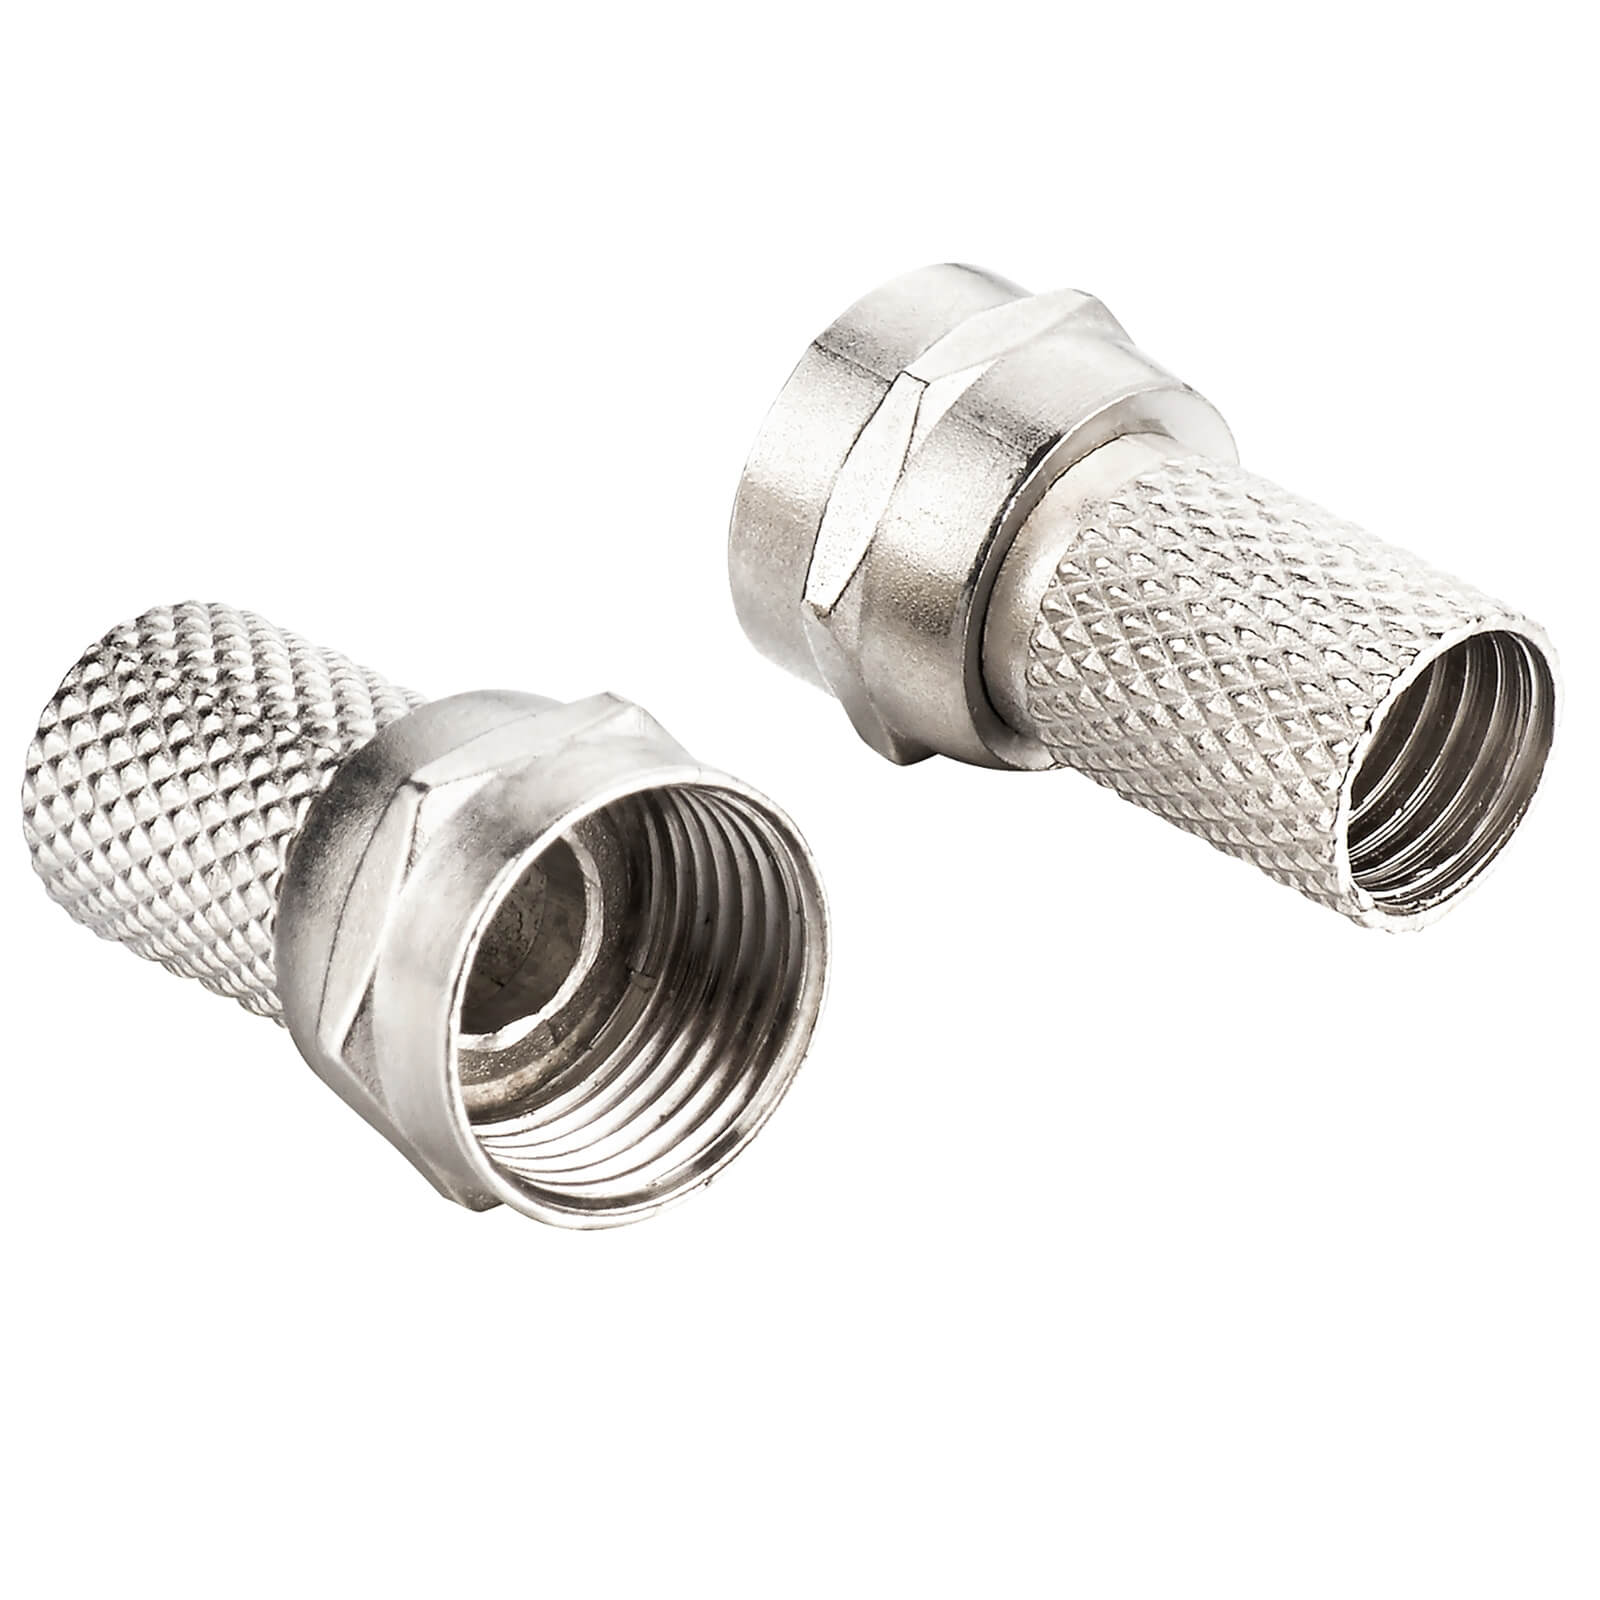 Ross Satellite Cable Plugs Nickel 2 Pack